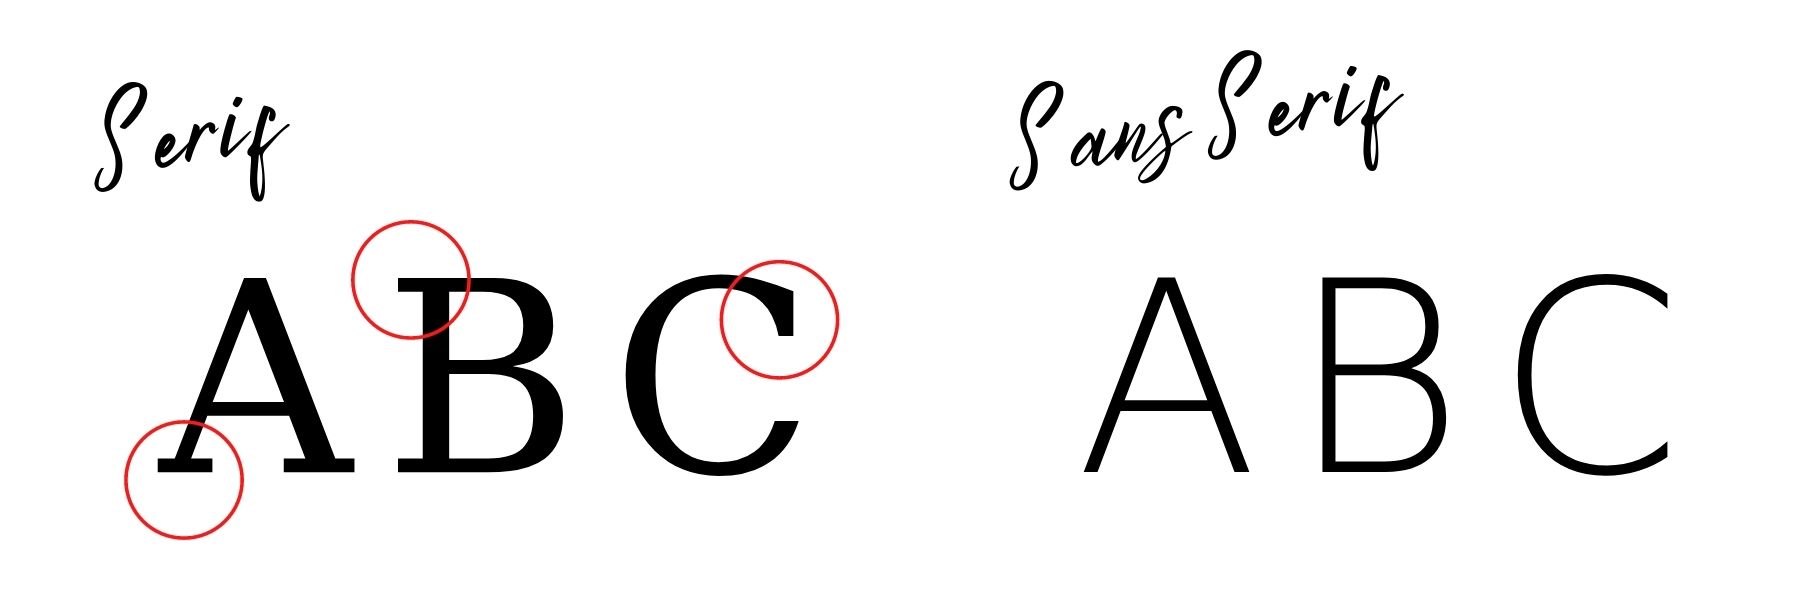 Abc written in serif and sans-serif fonts